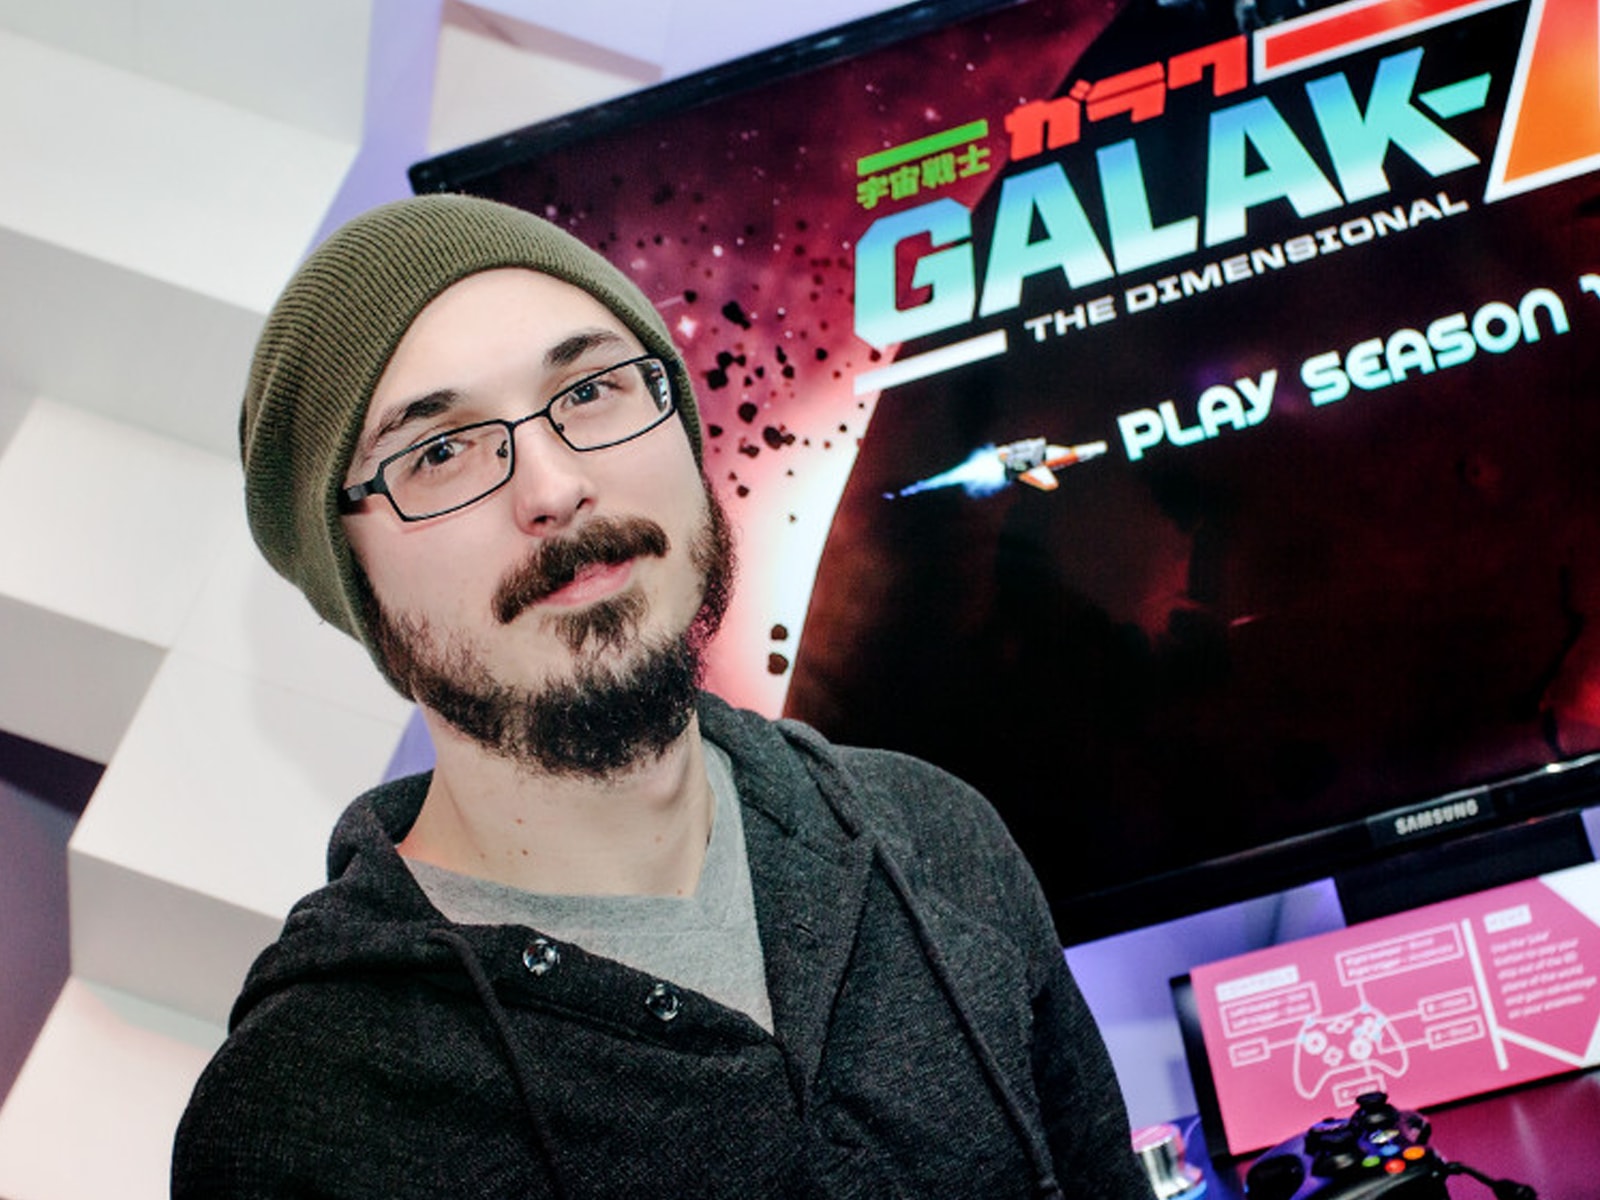 DigiPen alumnus Zach Aikman posing in front of monitor showing Galak-Z title screen at PAX2013